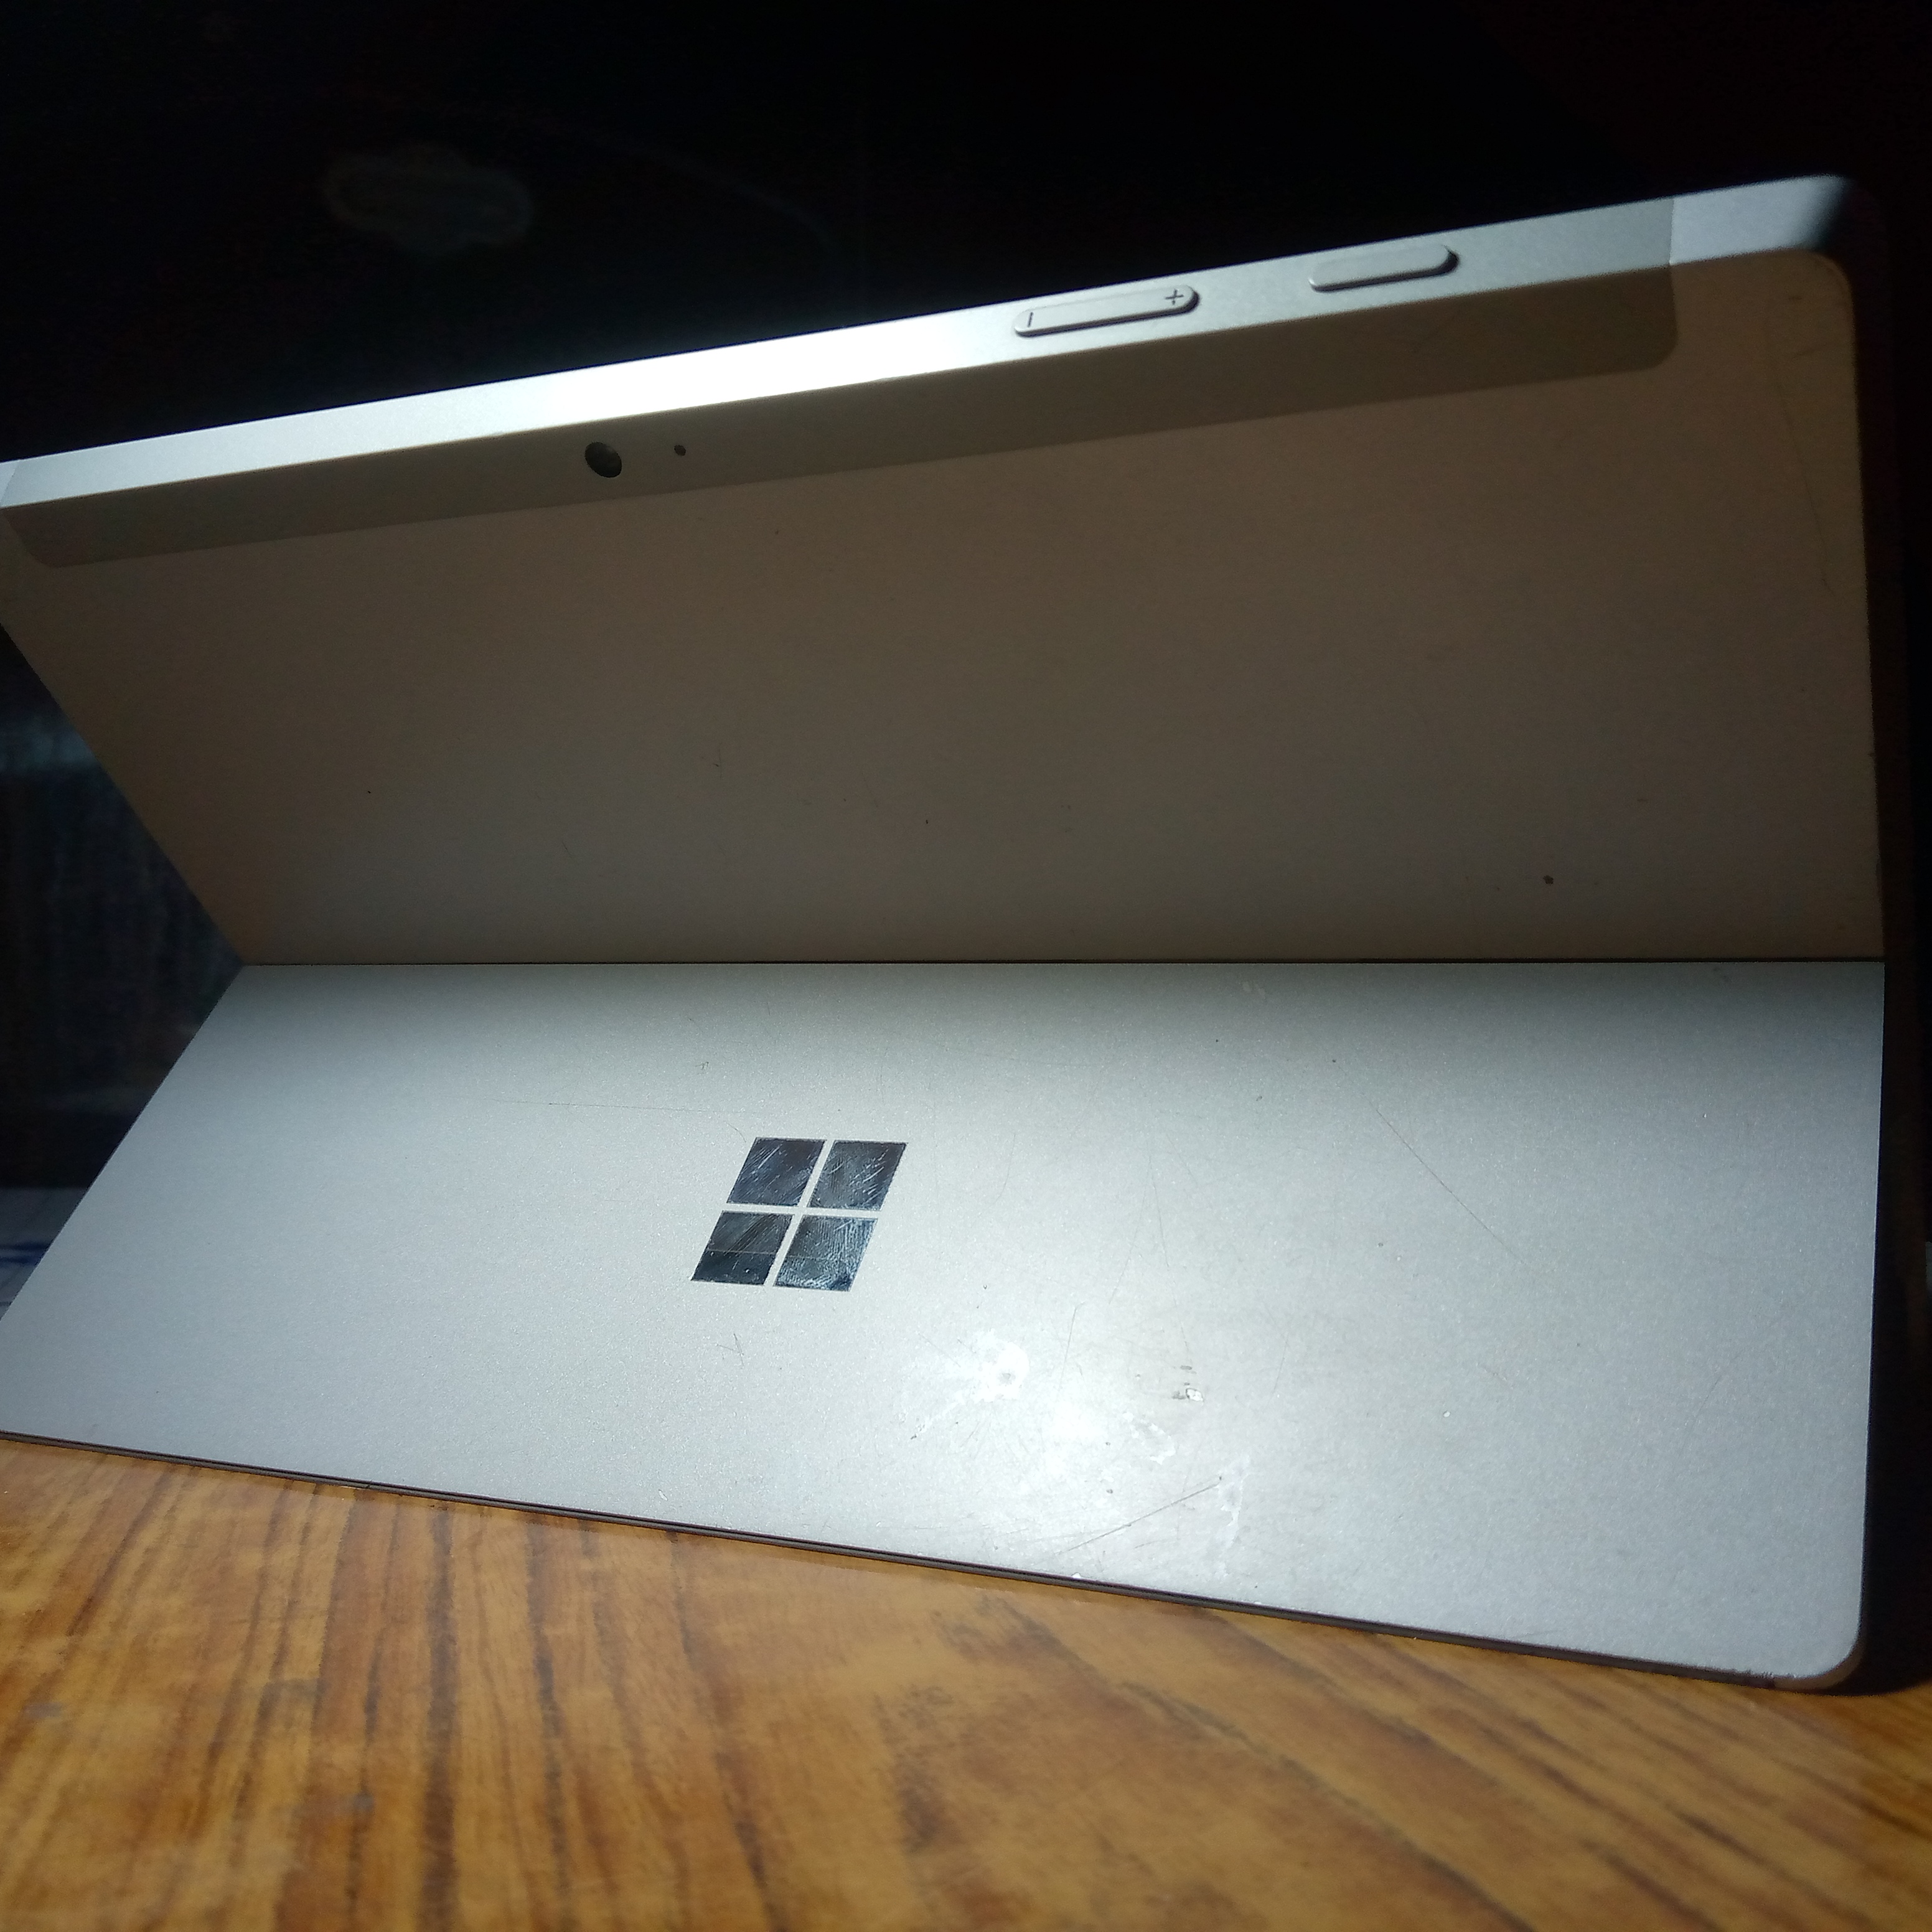 Microsoft surface 2 experience the best old and gold